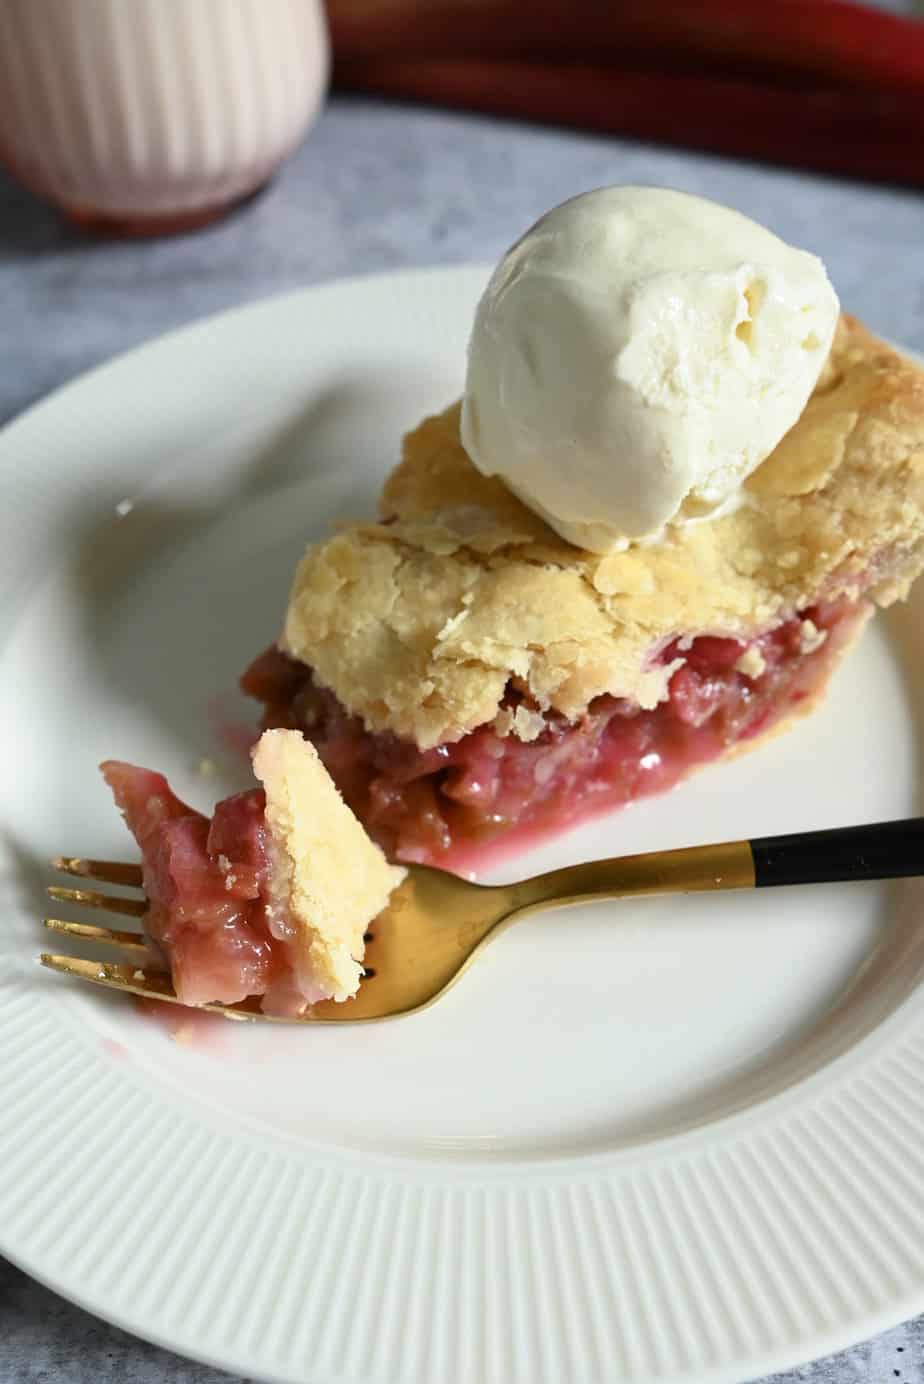 Gold fork with a bite of rhubarb pie.